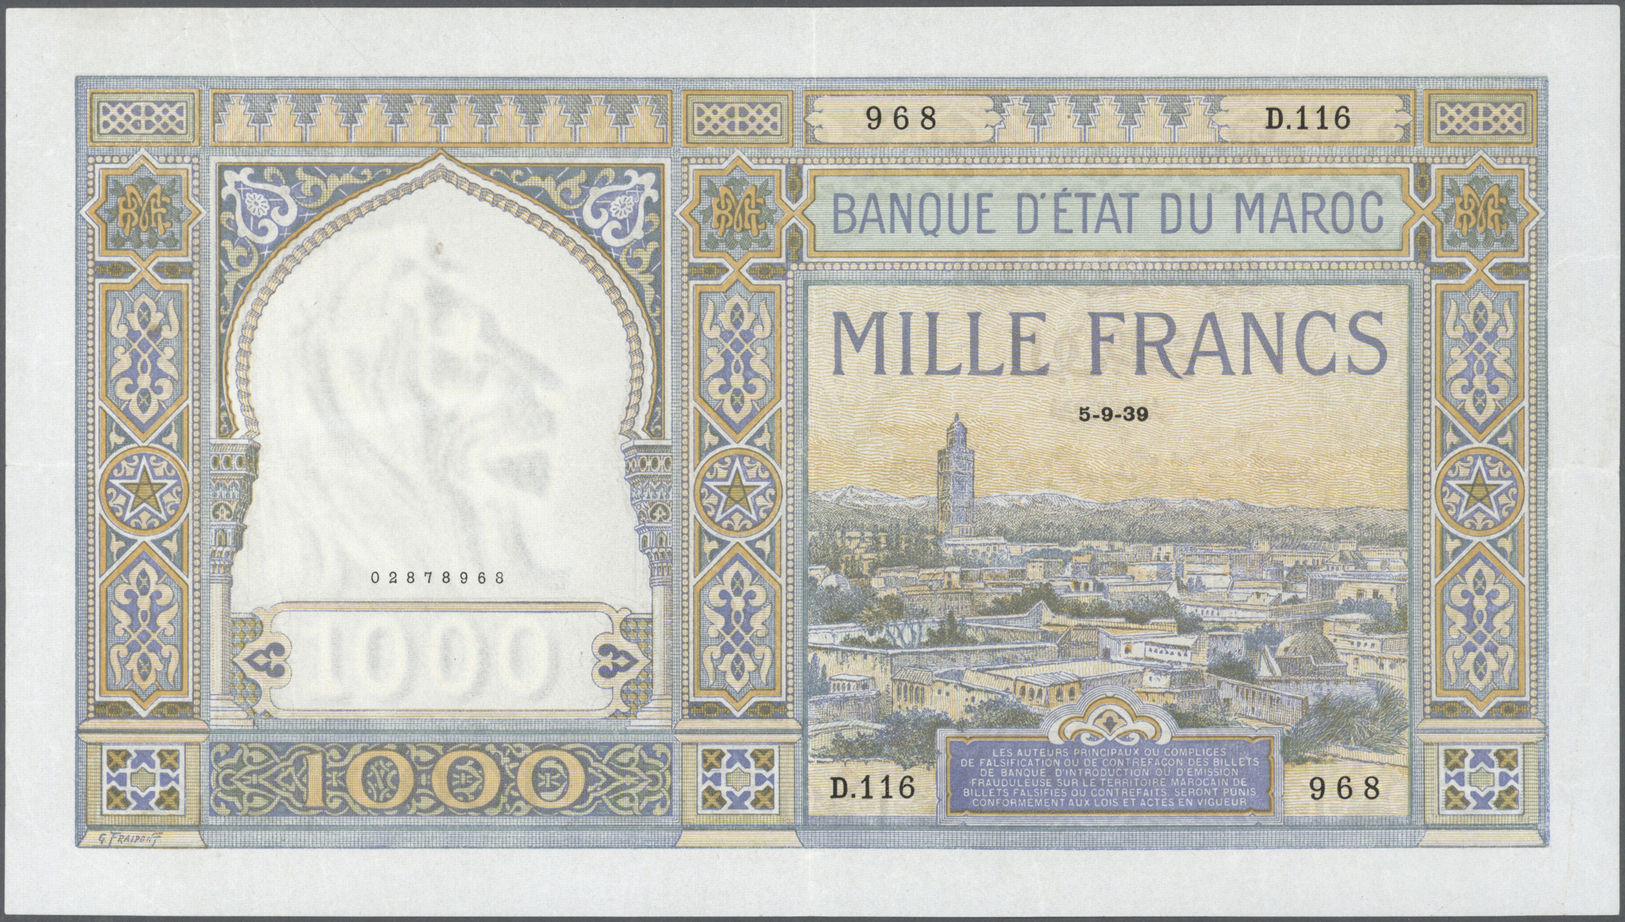 01736 Morocco / Marokko: 1000 Francs 1939 P. 16c In Exceptional Condition For This Type Of Note, Still Original Crispnes - Morocco